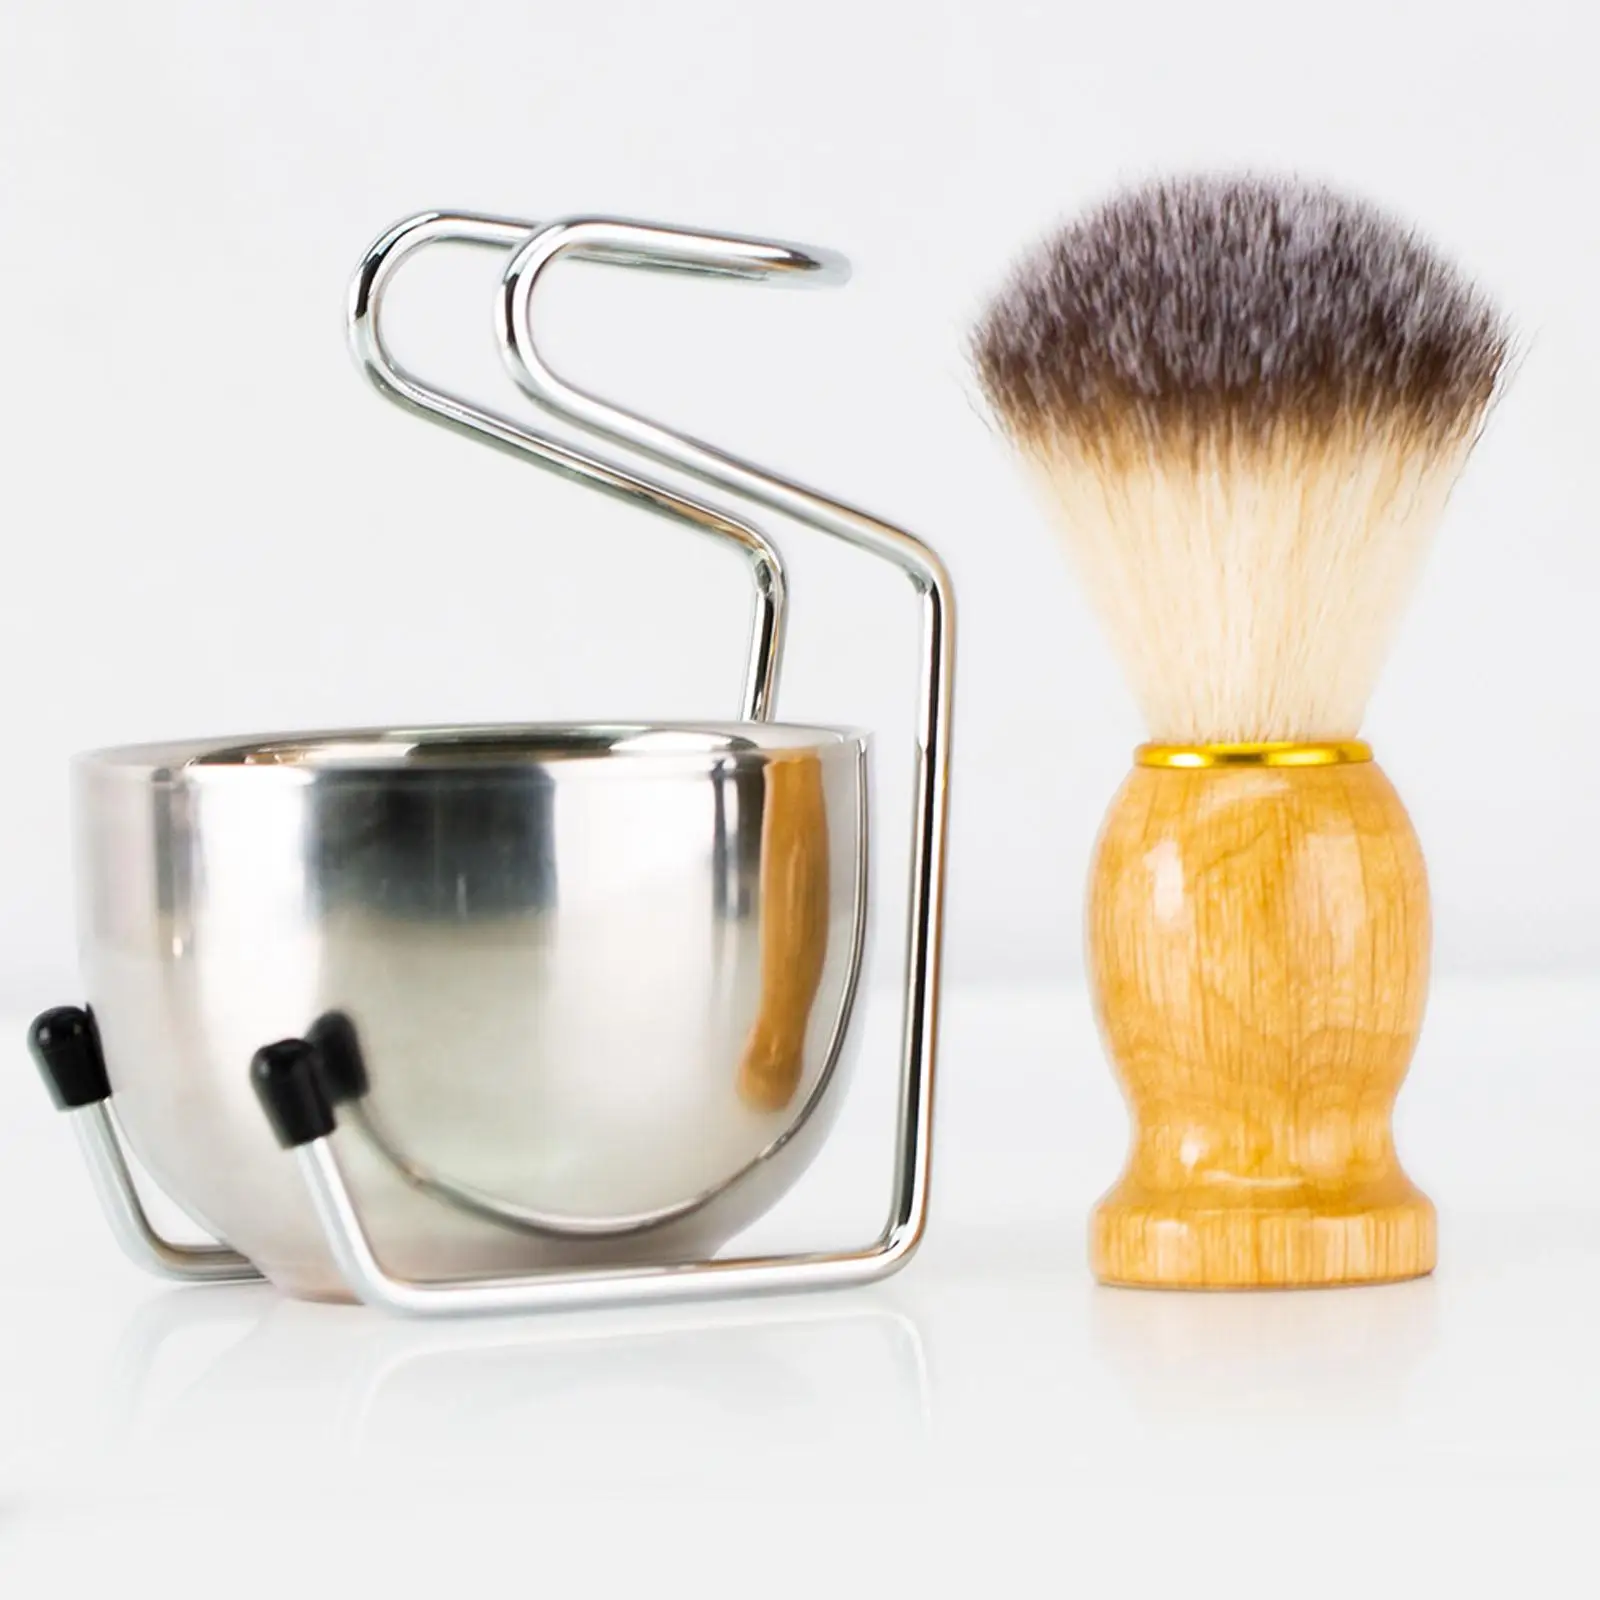 Stainless Steel Shaving Stand with Bowl and Brush, Easy Carry Fashion Design Dia 82mm Bowl